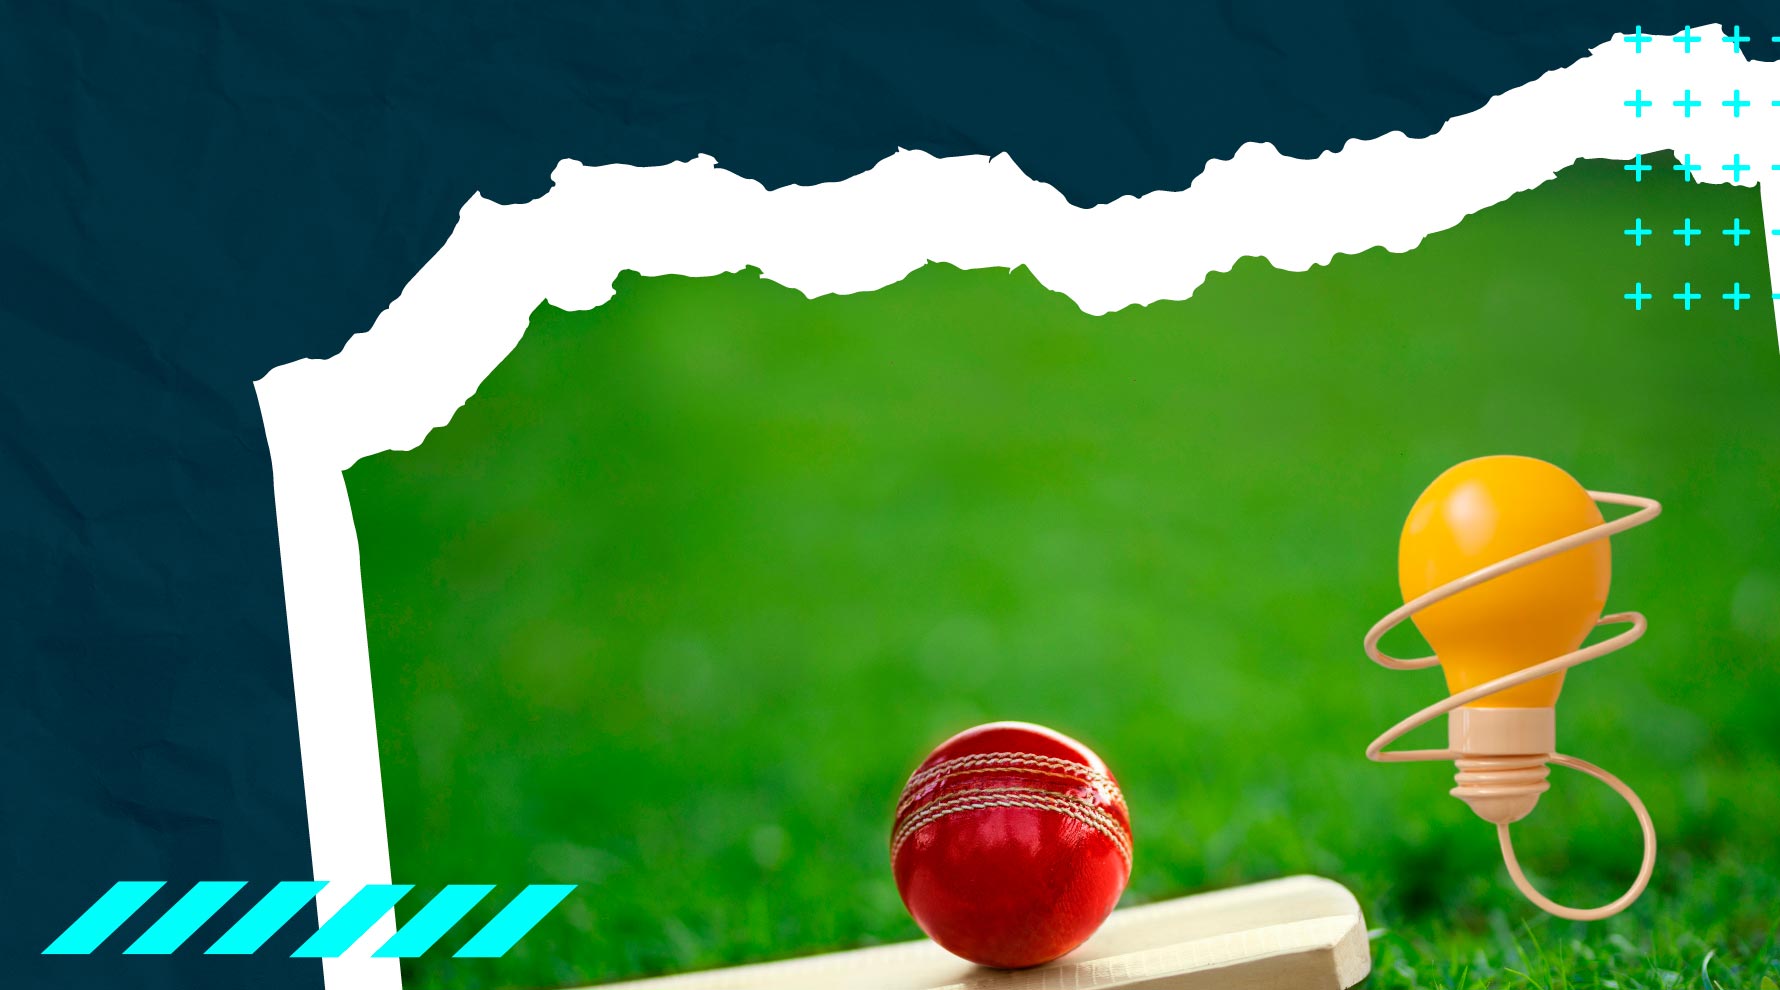 Cricket Betting Tips 100 Free Cricket Match Predictions from Experts